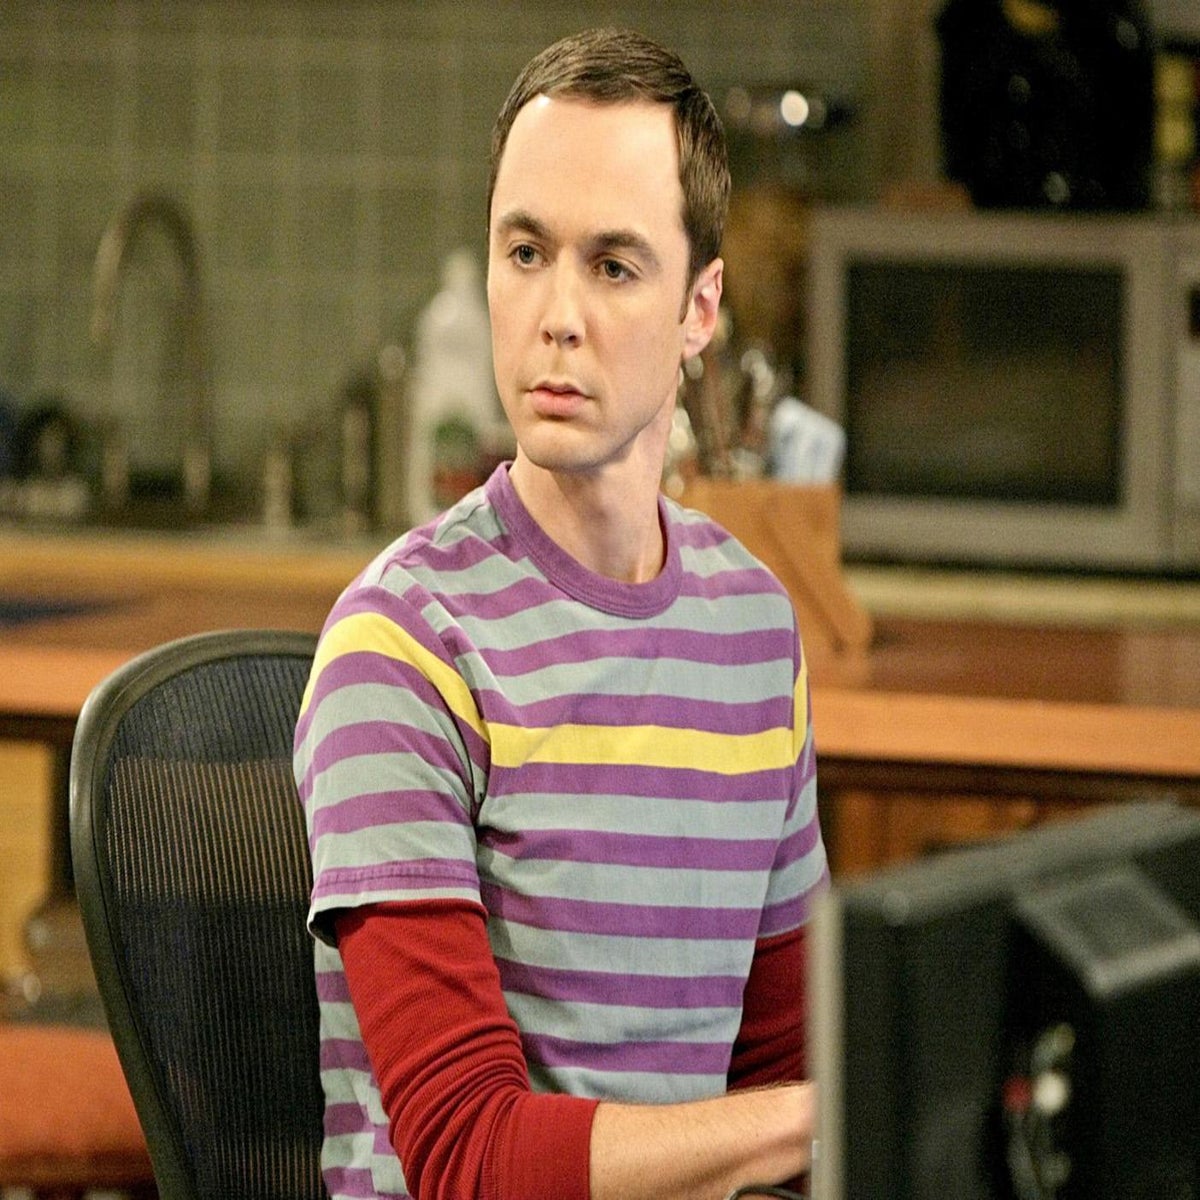 Big Bang Theory spin-off Young Sheldon confirmed to be ending